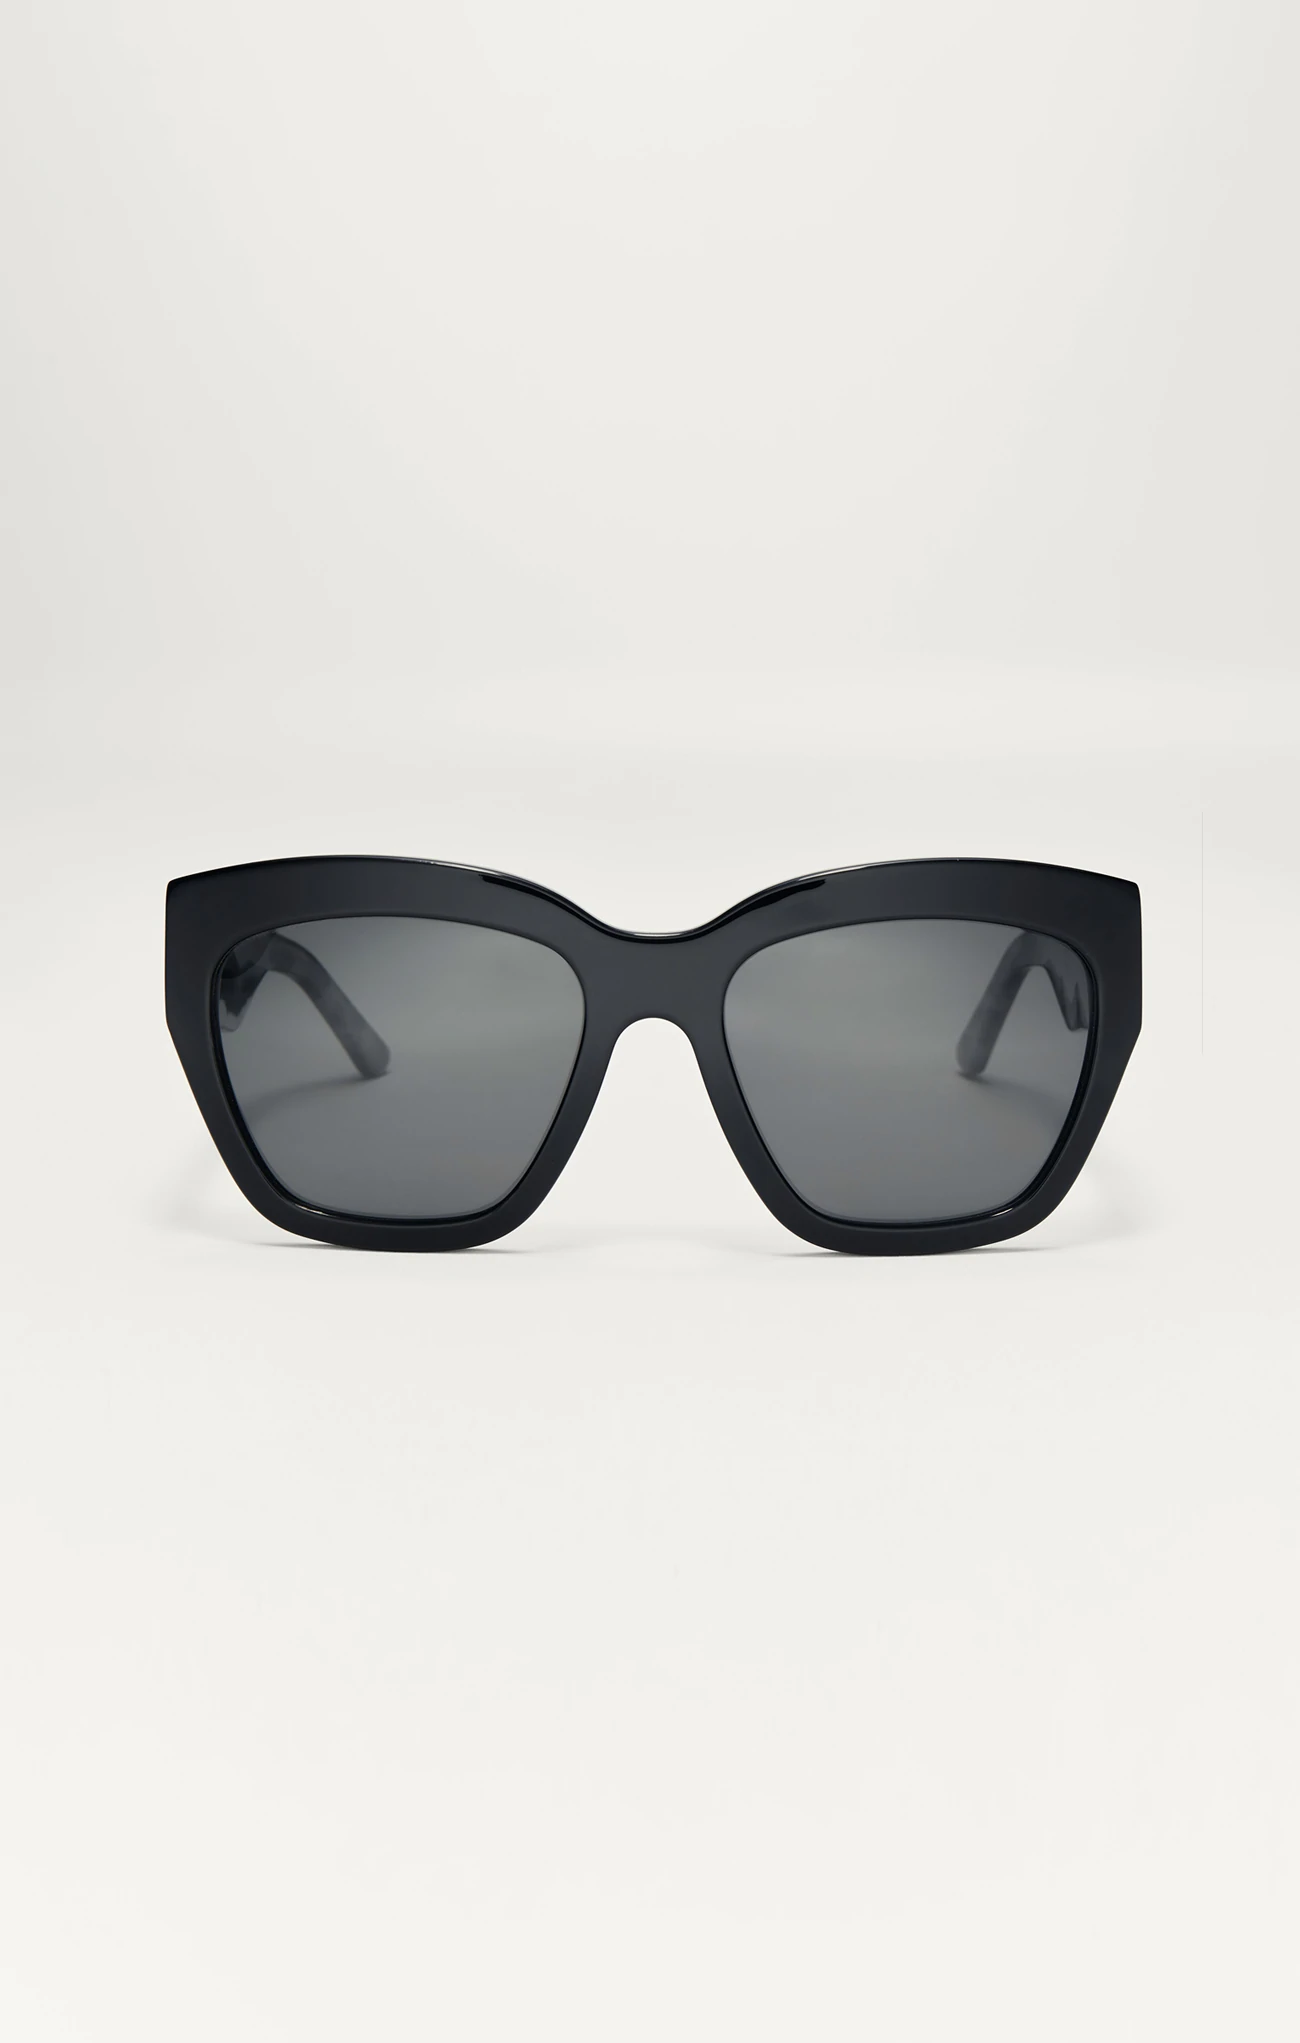 Incognito in Polished Black-Grey